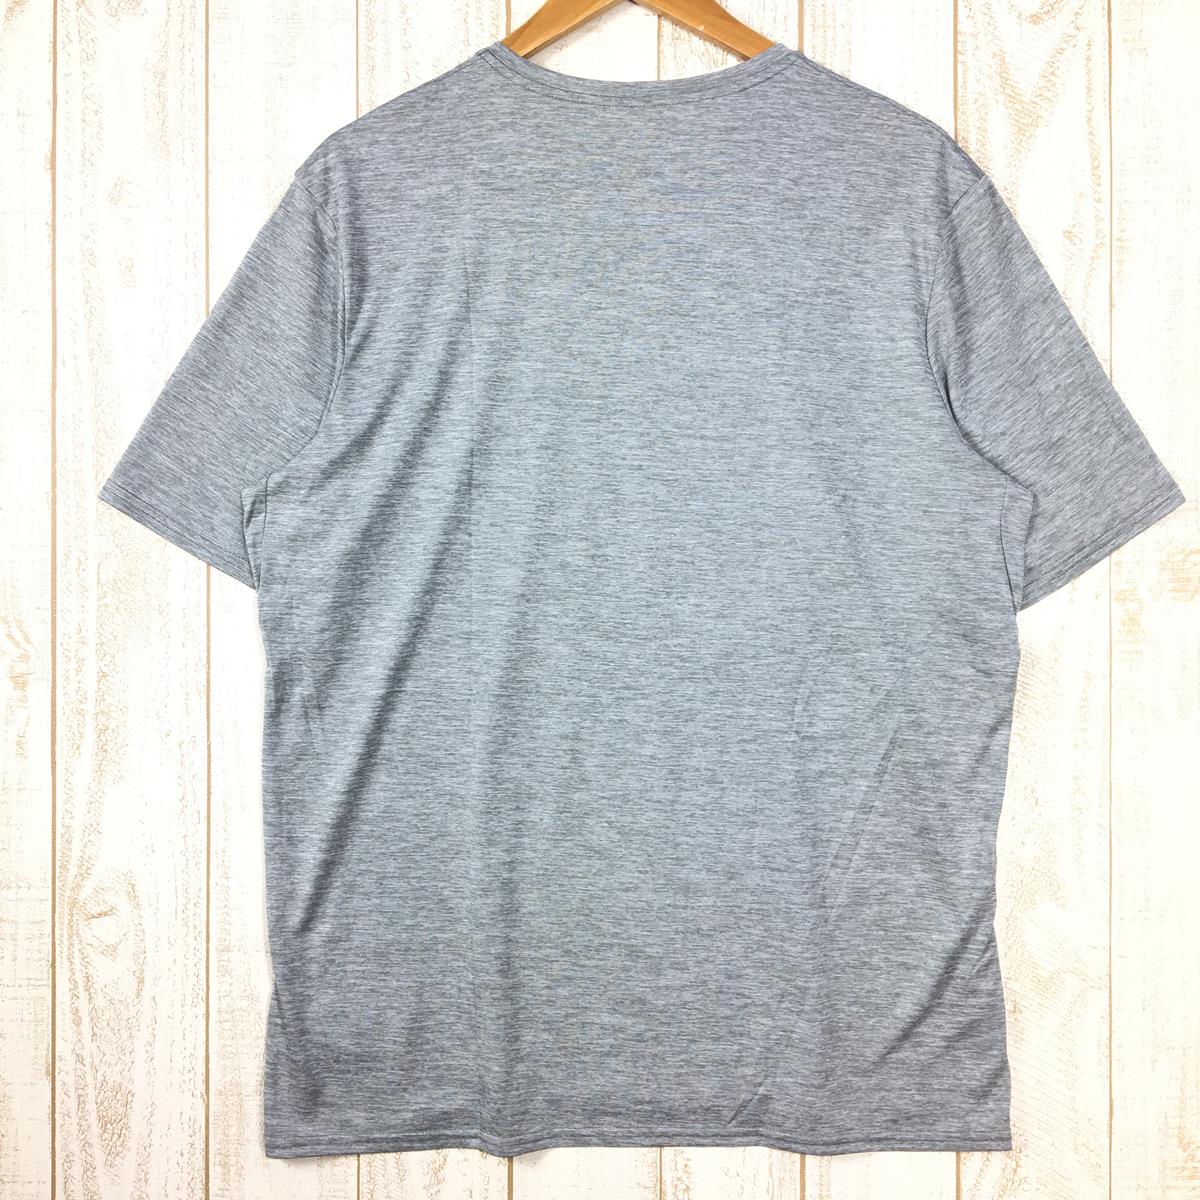 【MEN's L】 パタゴニア キャプリーン デイリー グラフィック Tシャツ CAPILENE DAILY GRAPHIC T-SHIRT PATAGONIA 45286 RSFE Rugby Stripe : Feather Grey グレー系